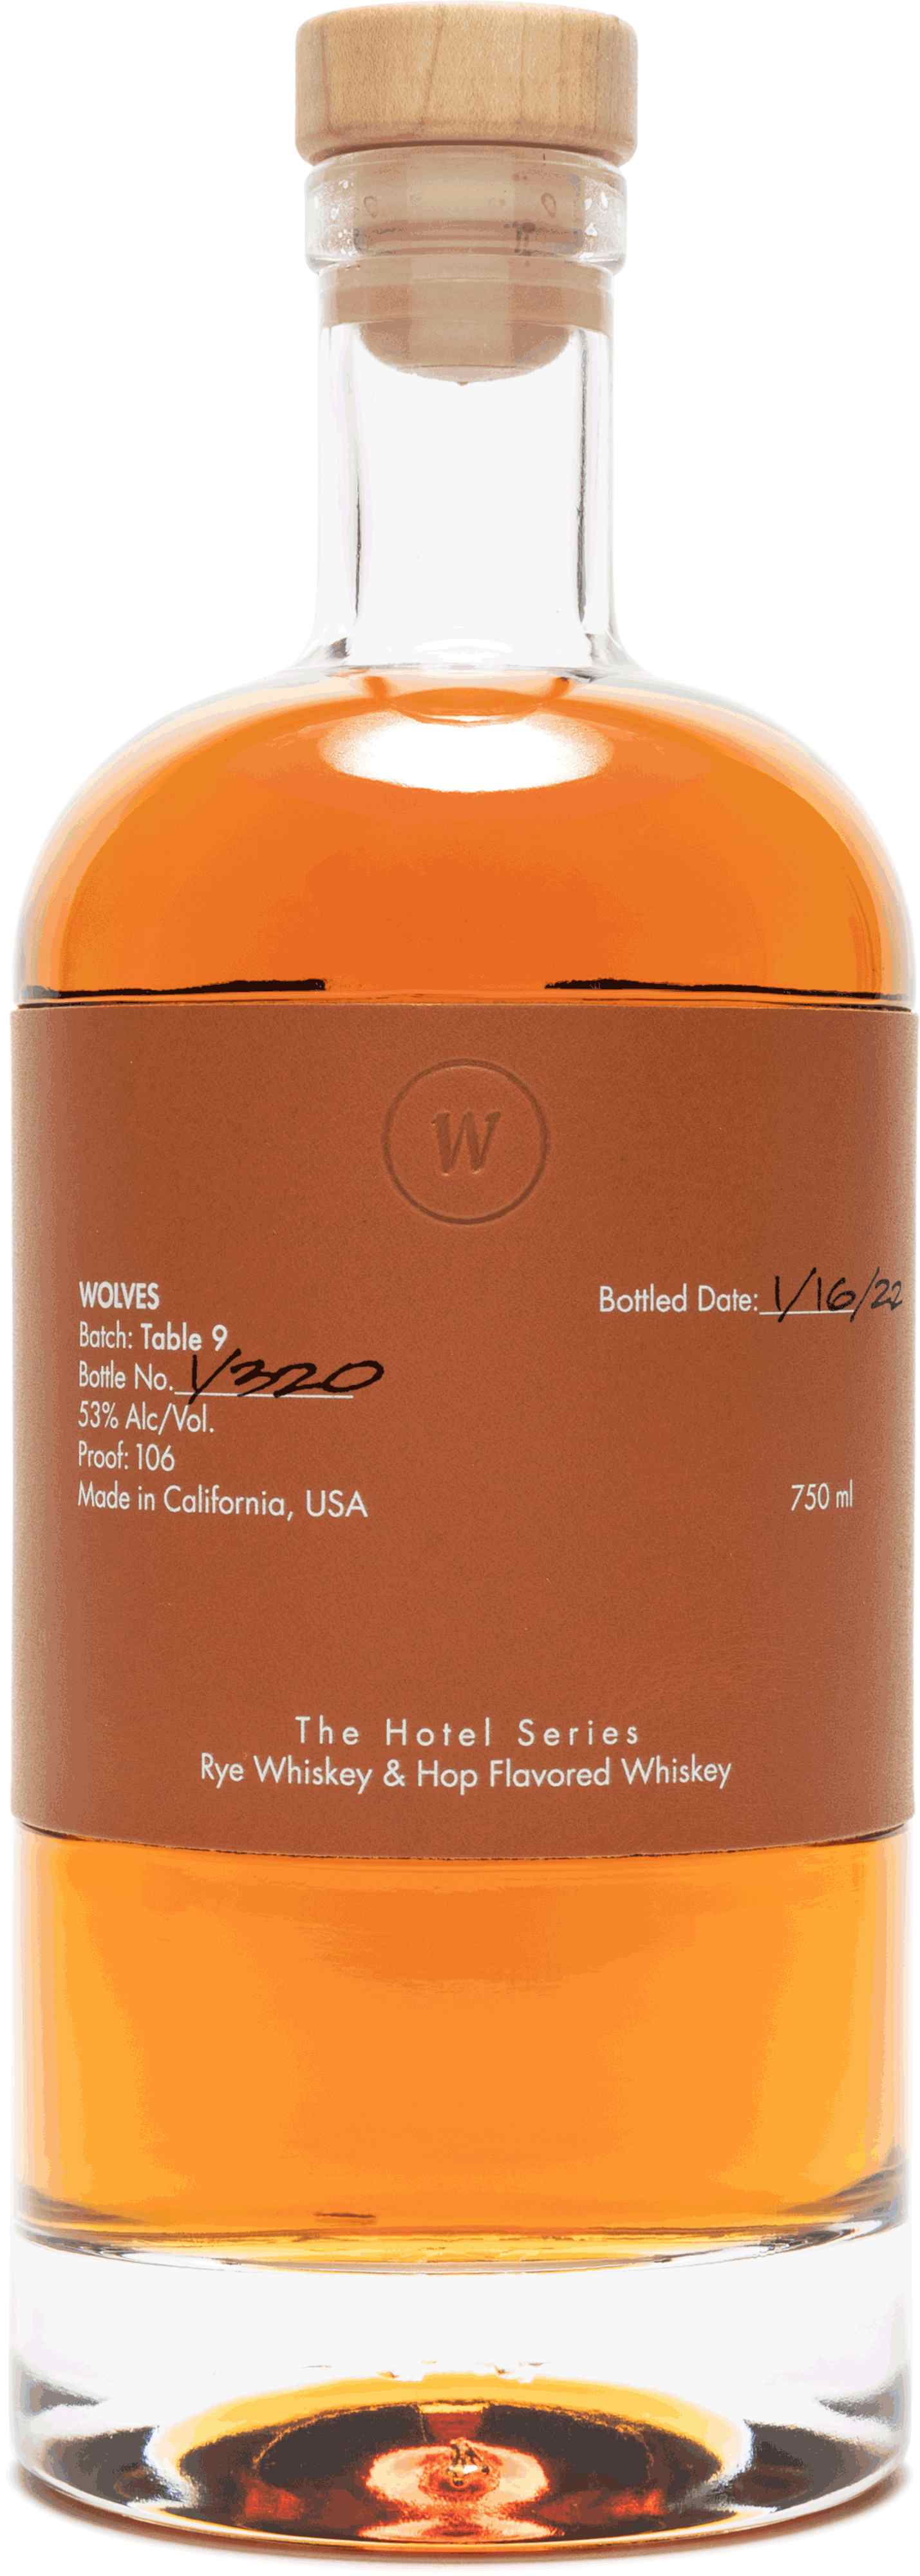 Wolves The Hotel Series Table 9 Rye Whiskey & Hop Flavored Whiskey ...